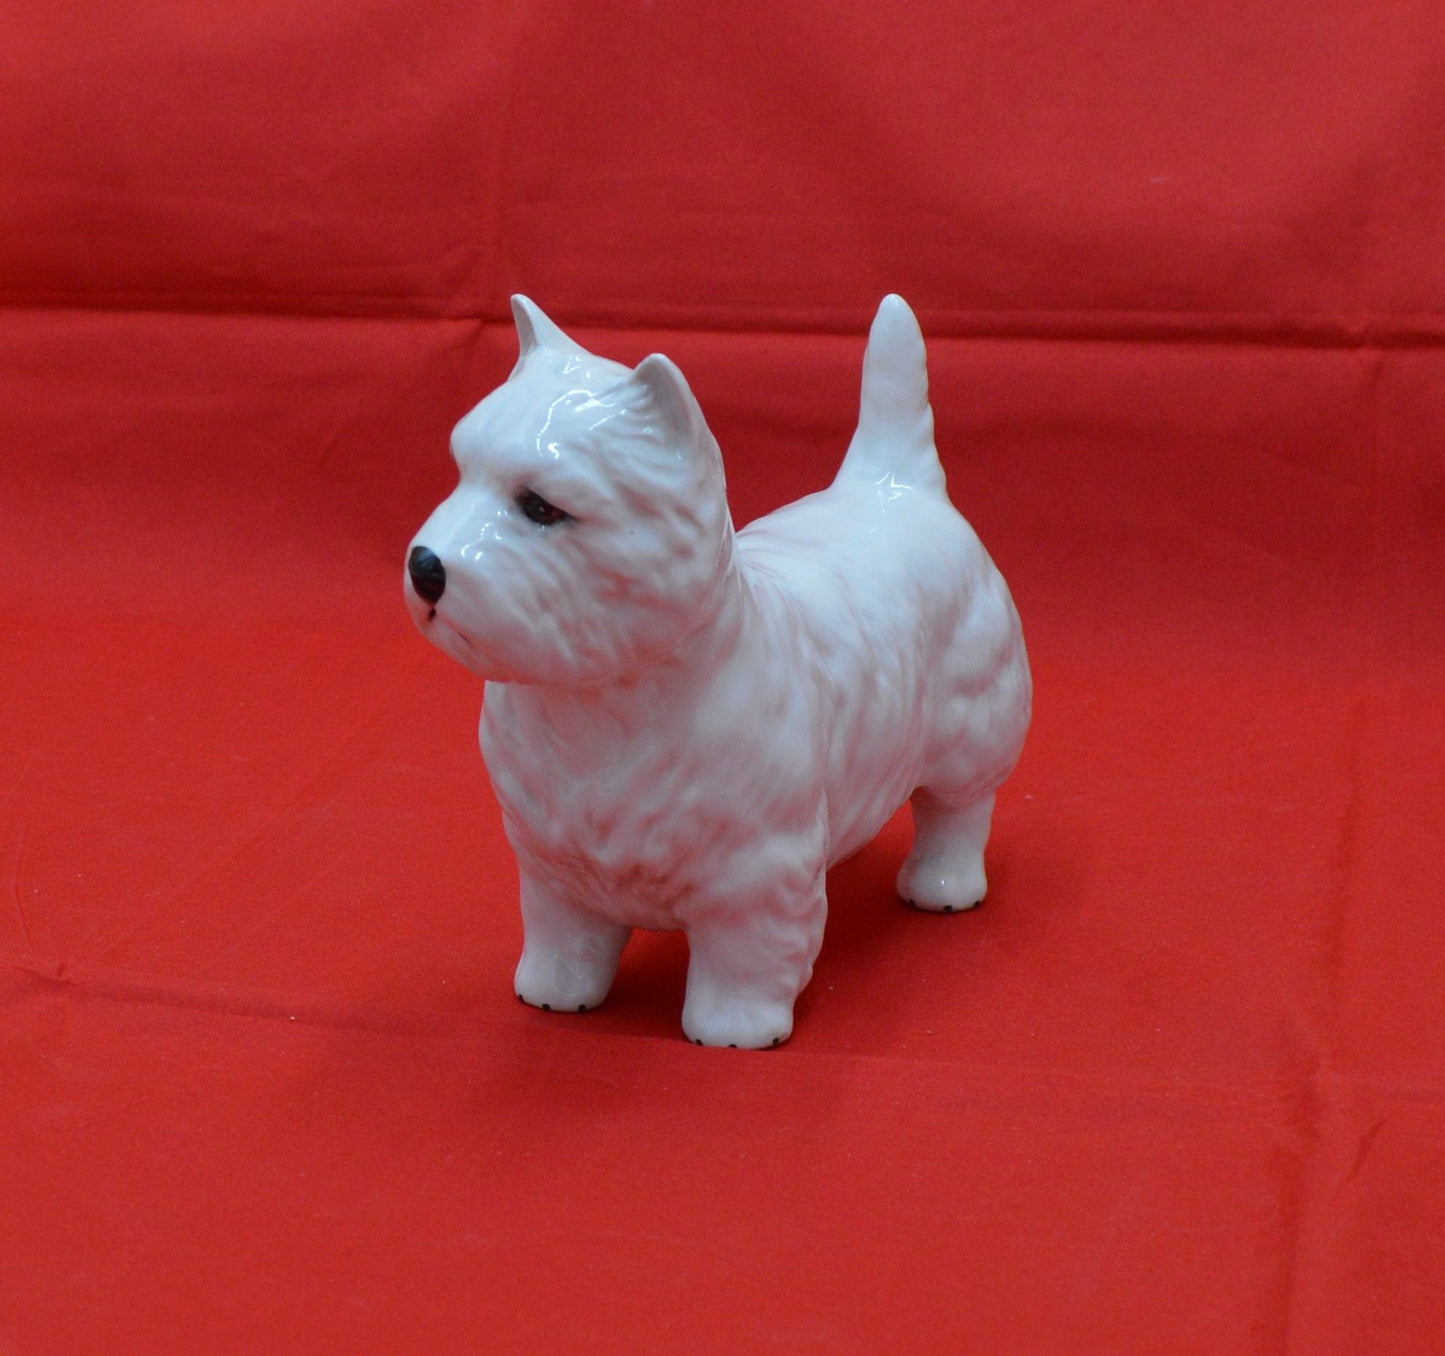 BESWICK DOG FIGURINE WEST HIGHLAND TERRIER(PREVIOUSLY OWNED) GOOD CONDITION - TMD167207